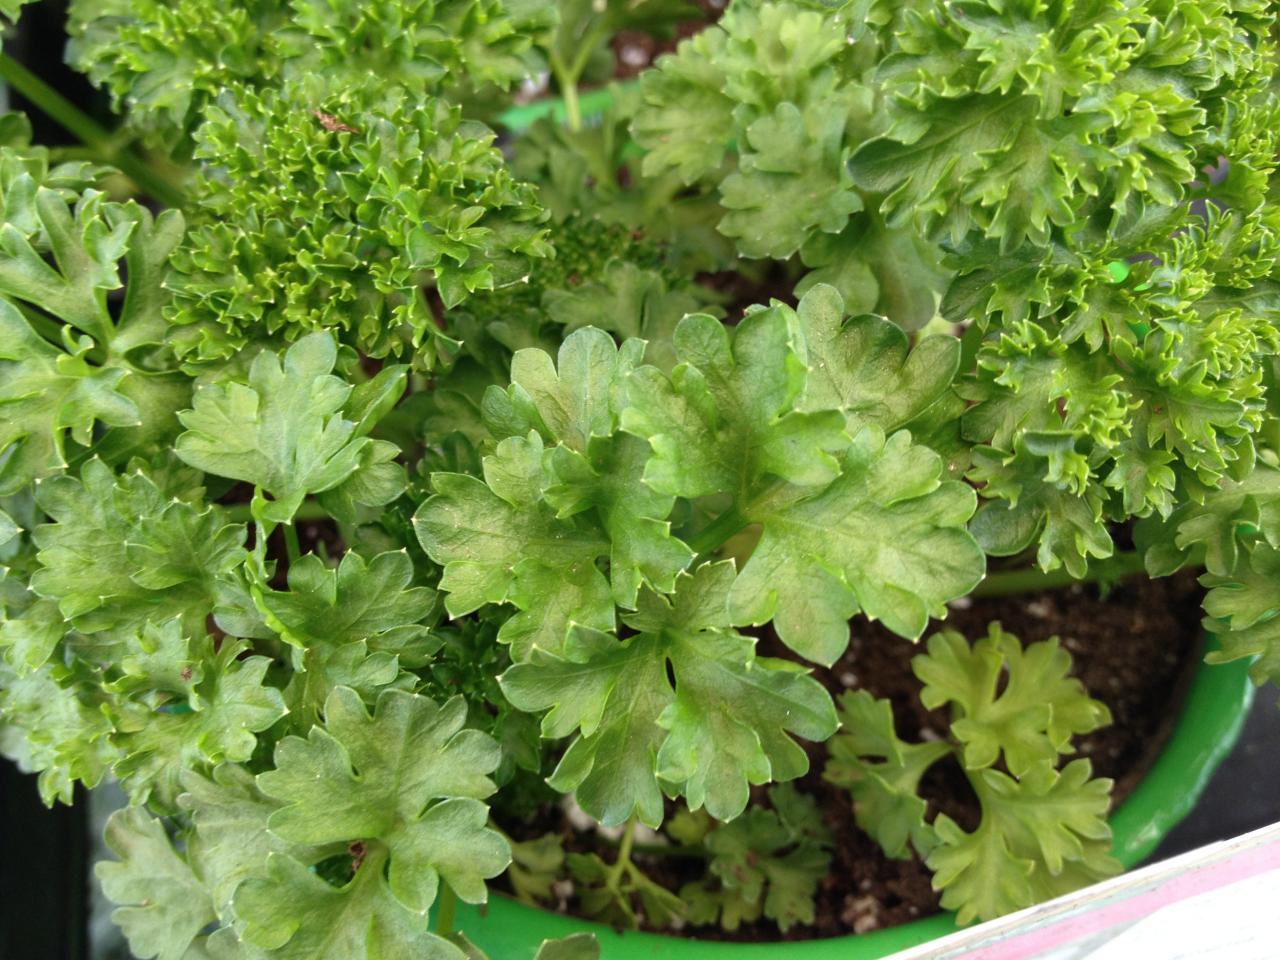 How to Grow Parsley and Other Herbs